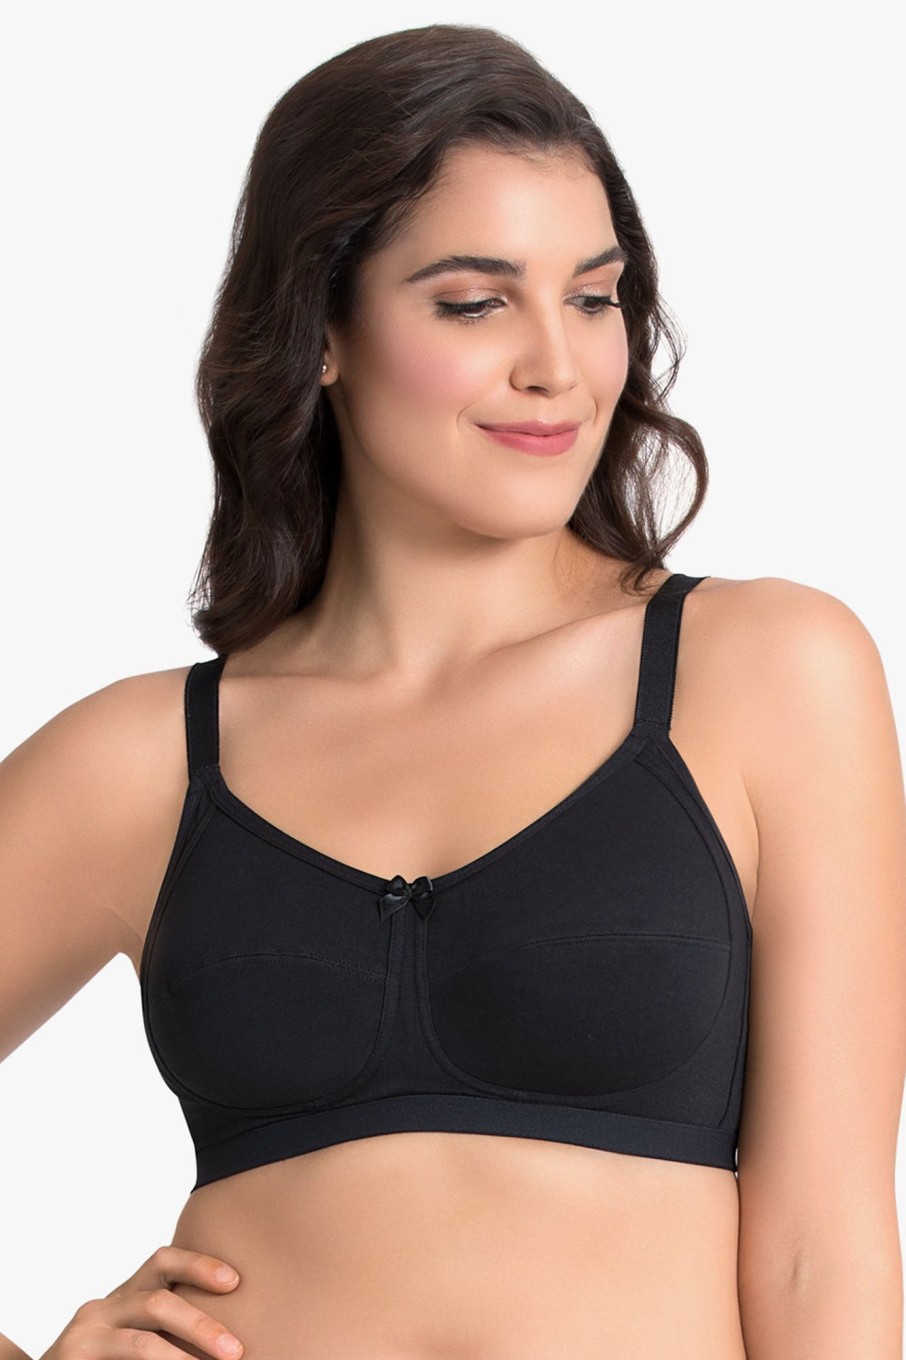 Bras amante Classic Shaper Non-Padded Non-Wired Bra Sandalwood ⋆  Explorpopclothes